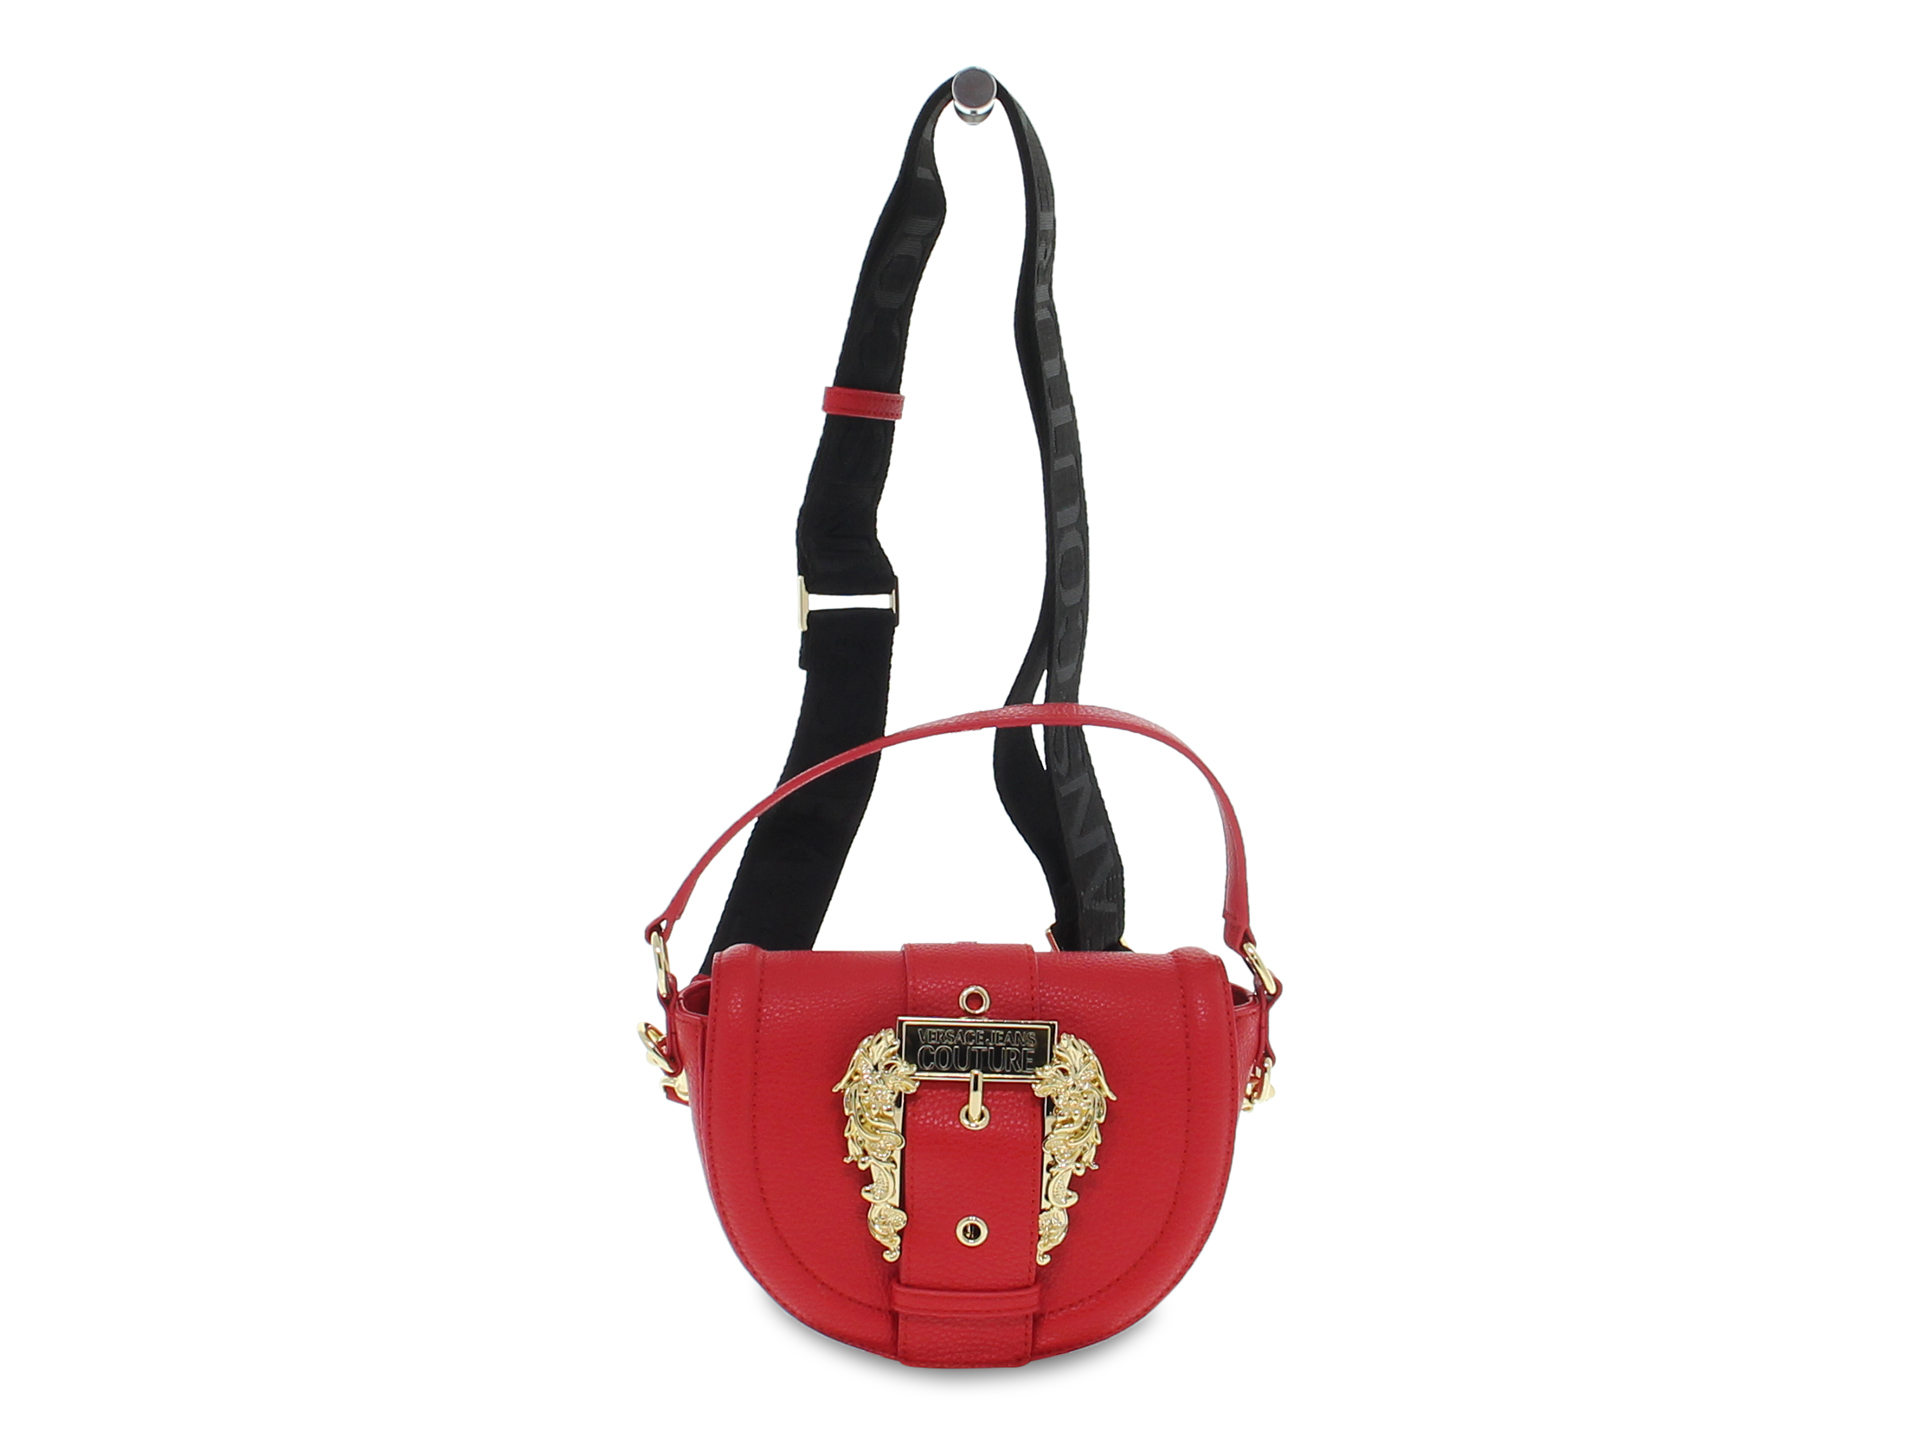 Handbag Versace Jeans Couture JEANS COUTURE LINEA F DIS 2 BUCKLE BASIC in  red tassel